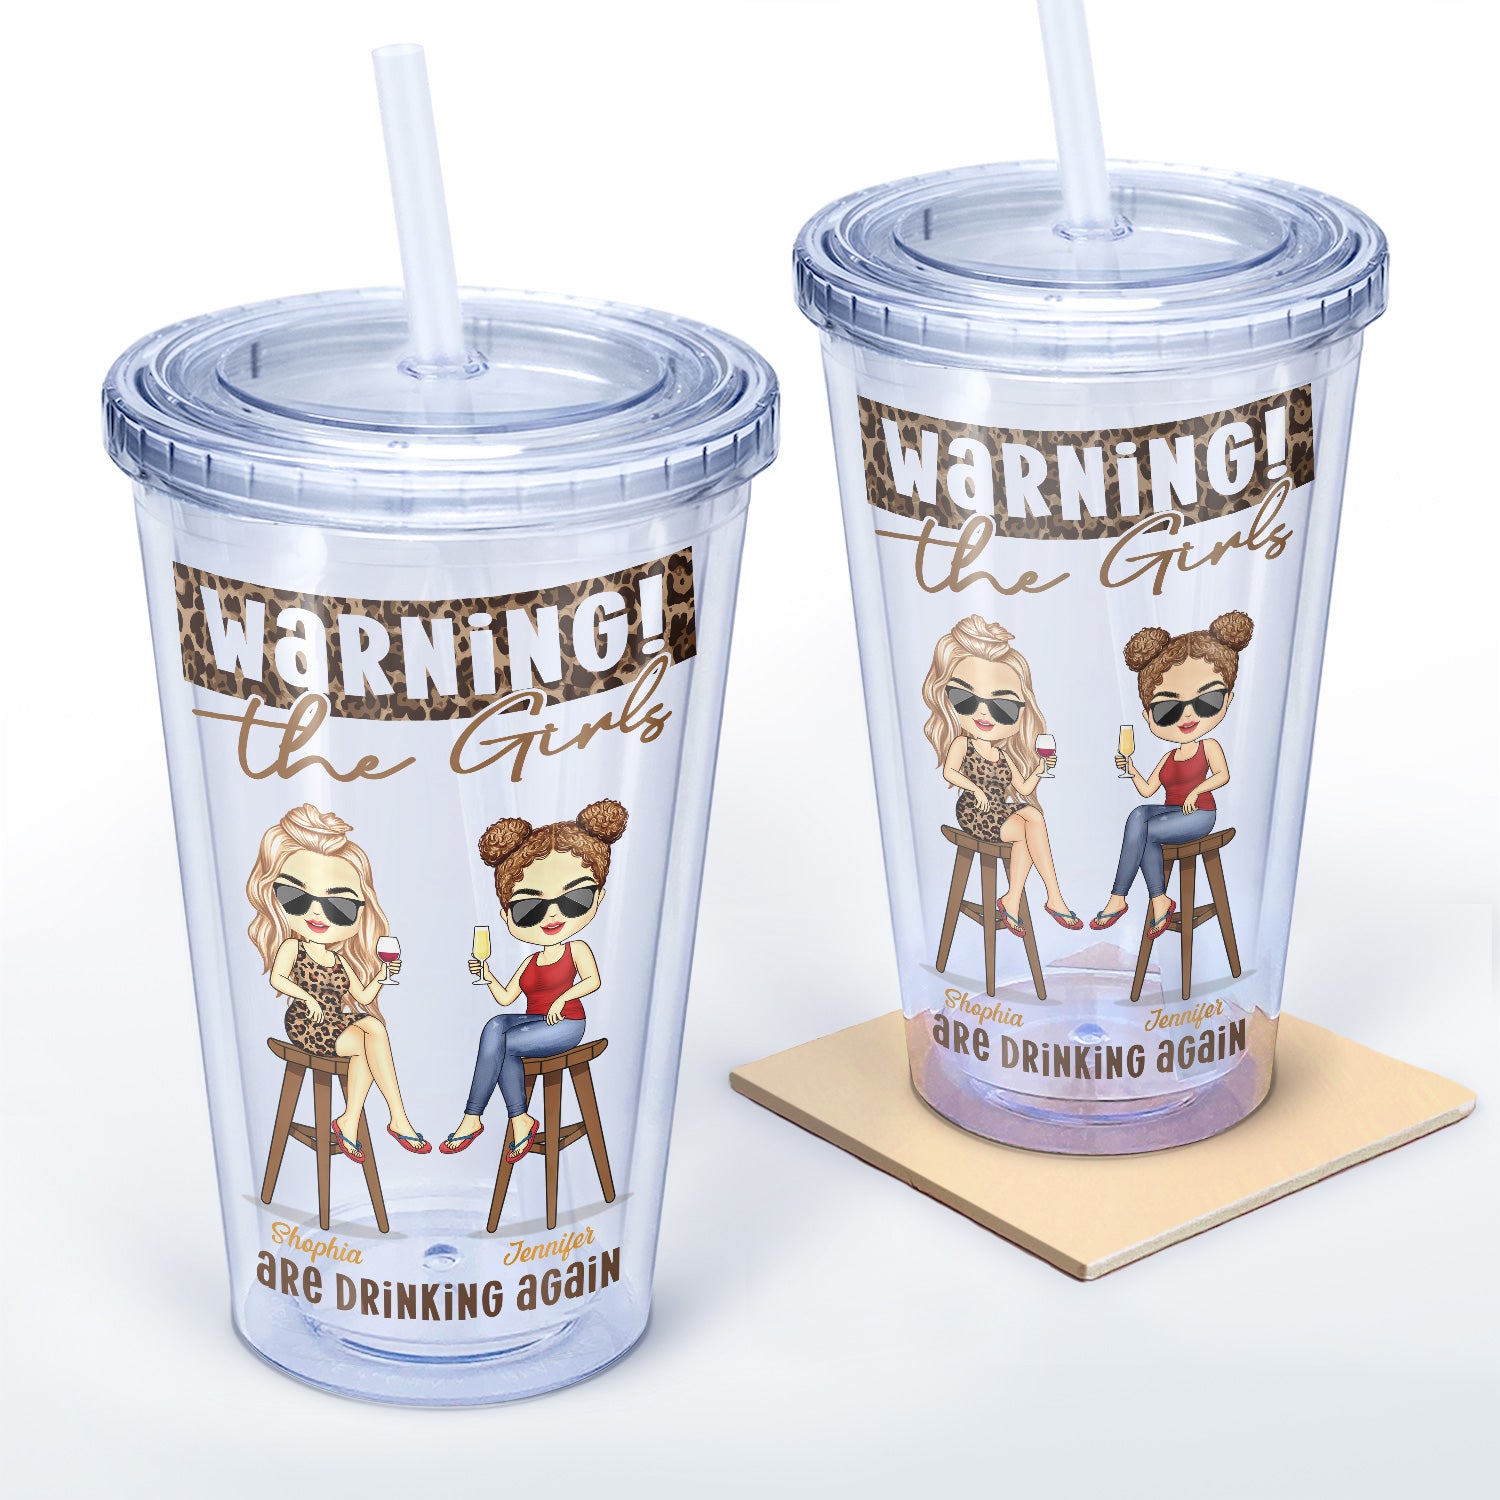 Warning The Girls Are Drinking Again Fashion Girl - Birthday, Travel Gift For Besties, Best Friends, Colleagues, Sisters - Personalized Acrylic Insulated Tumbler With Straw